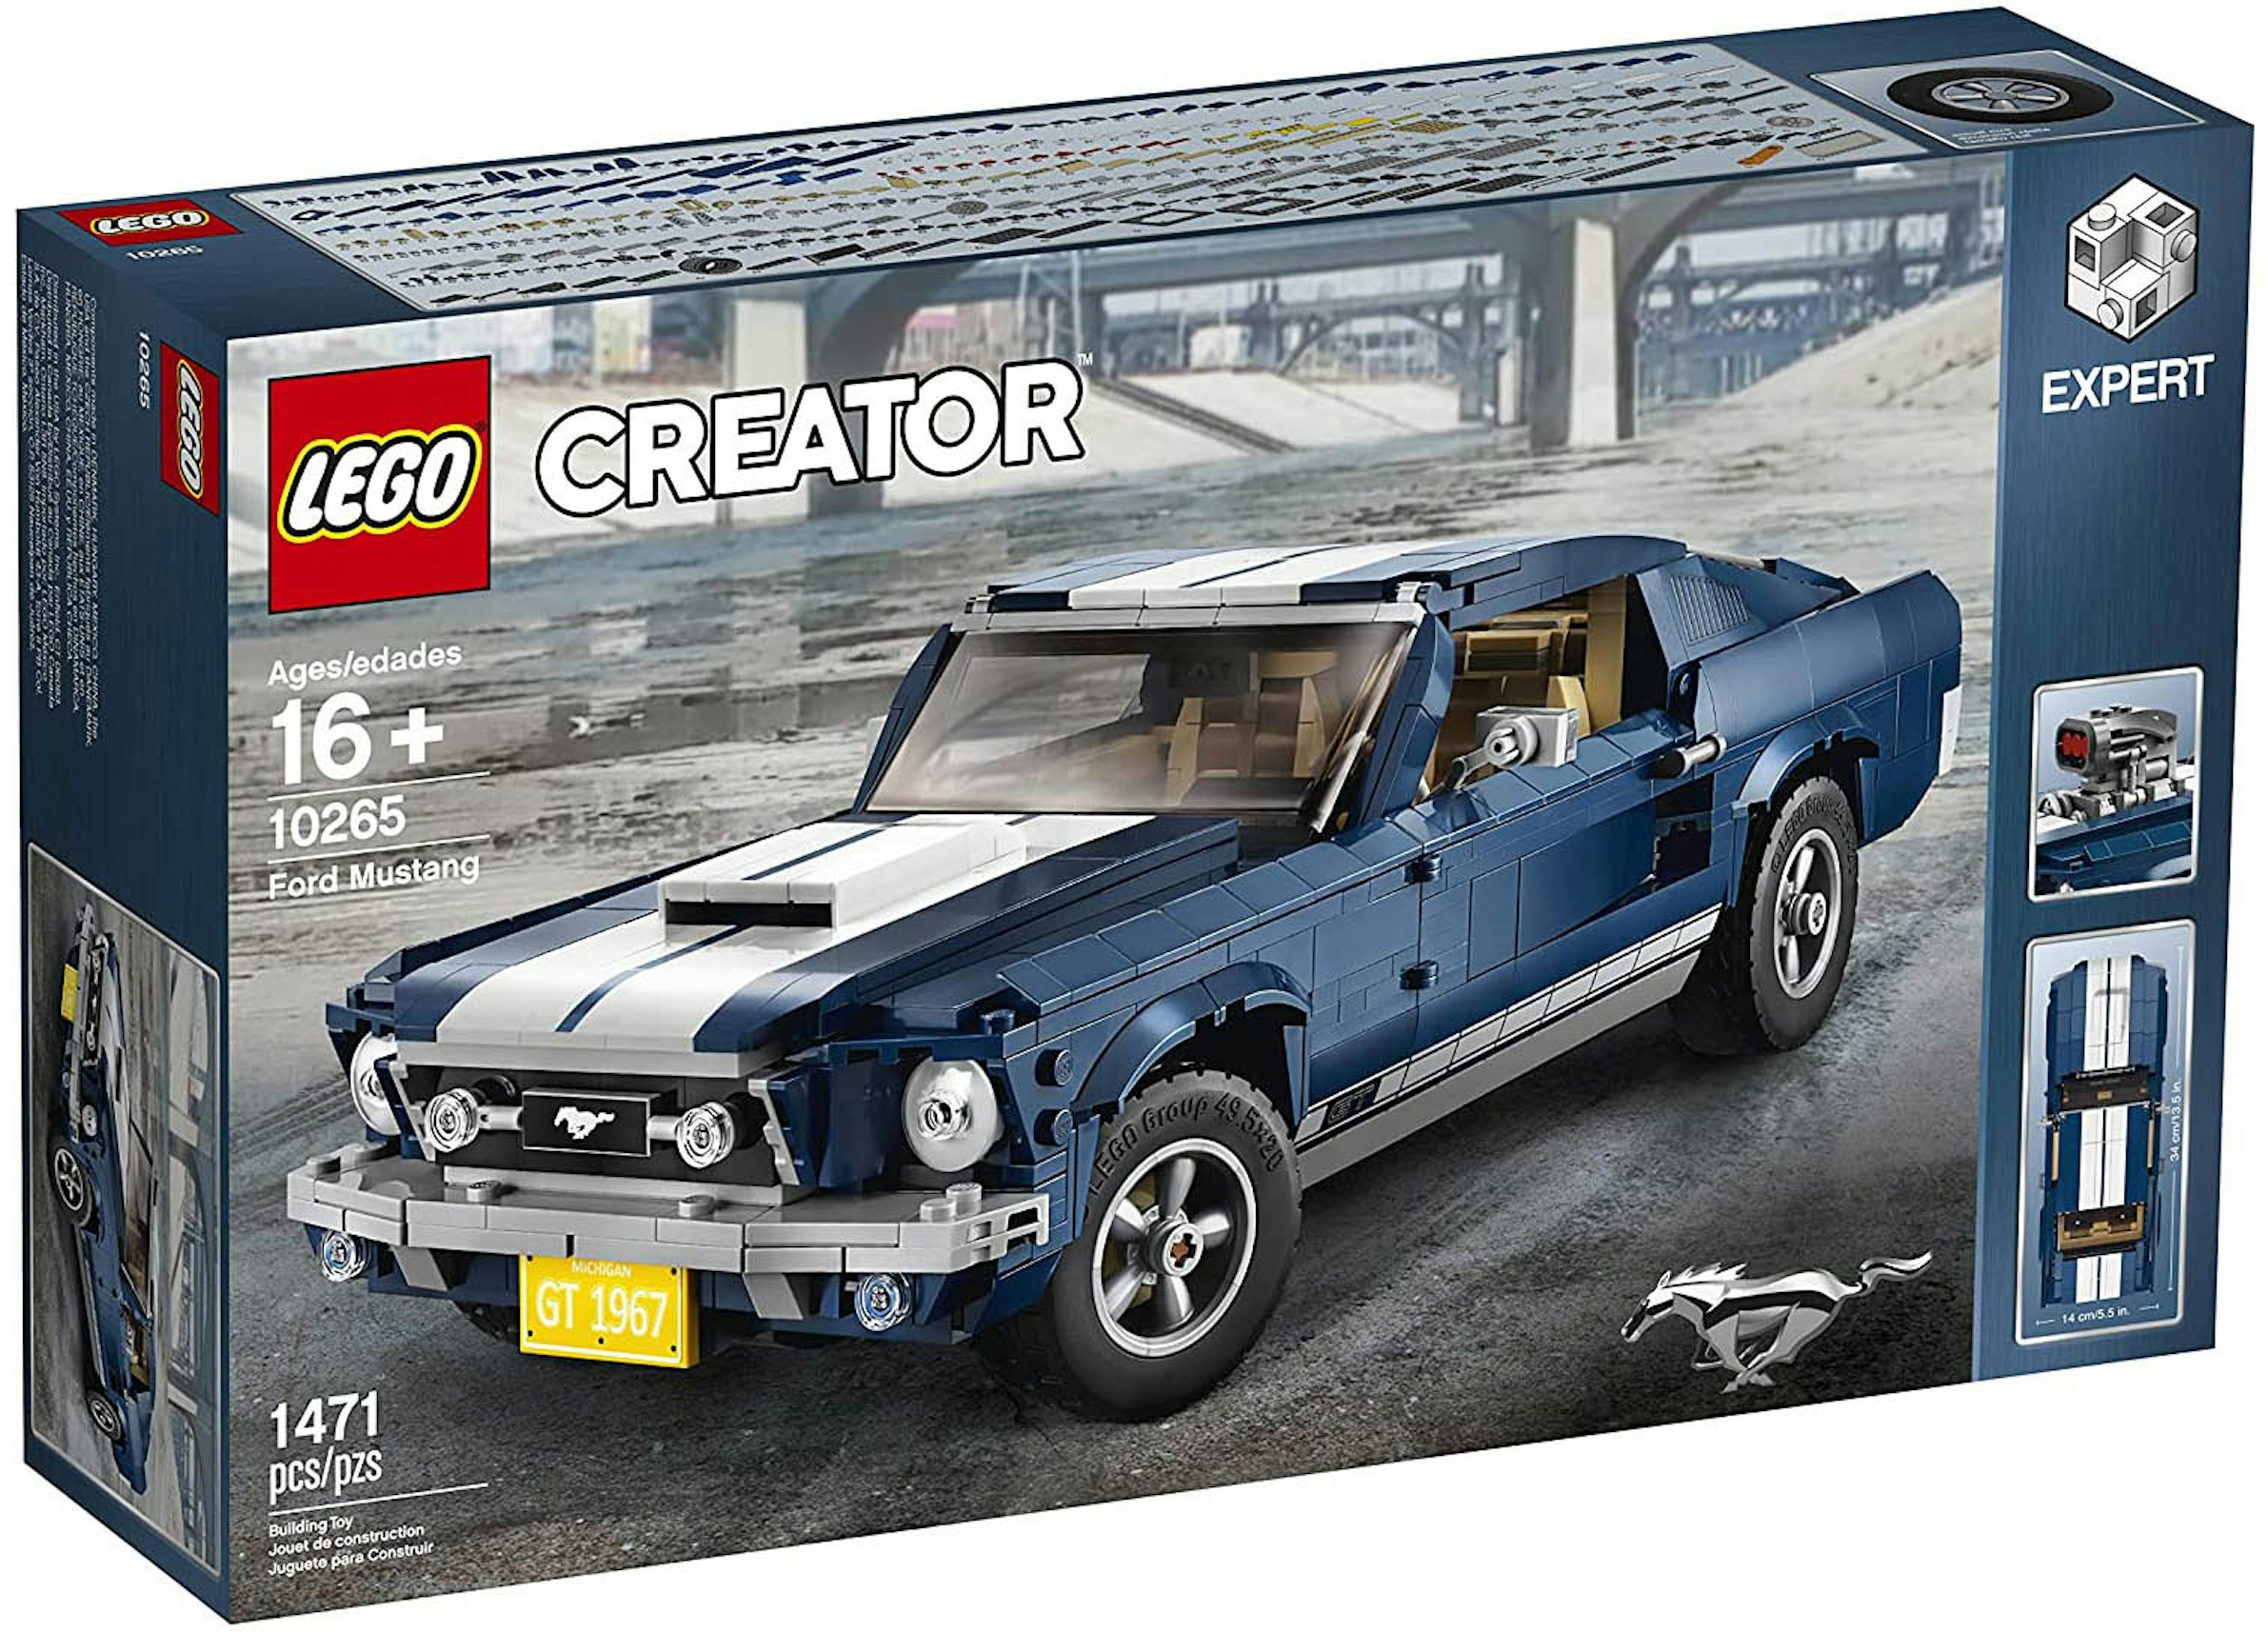 - Set US Mustang Ford GT 10265 LEGO Creator